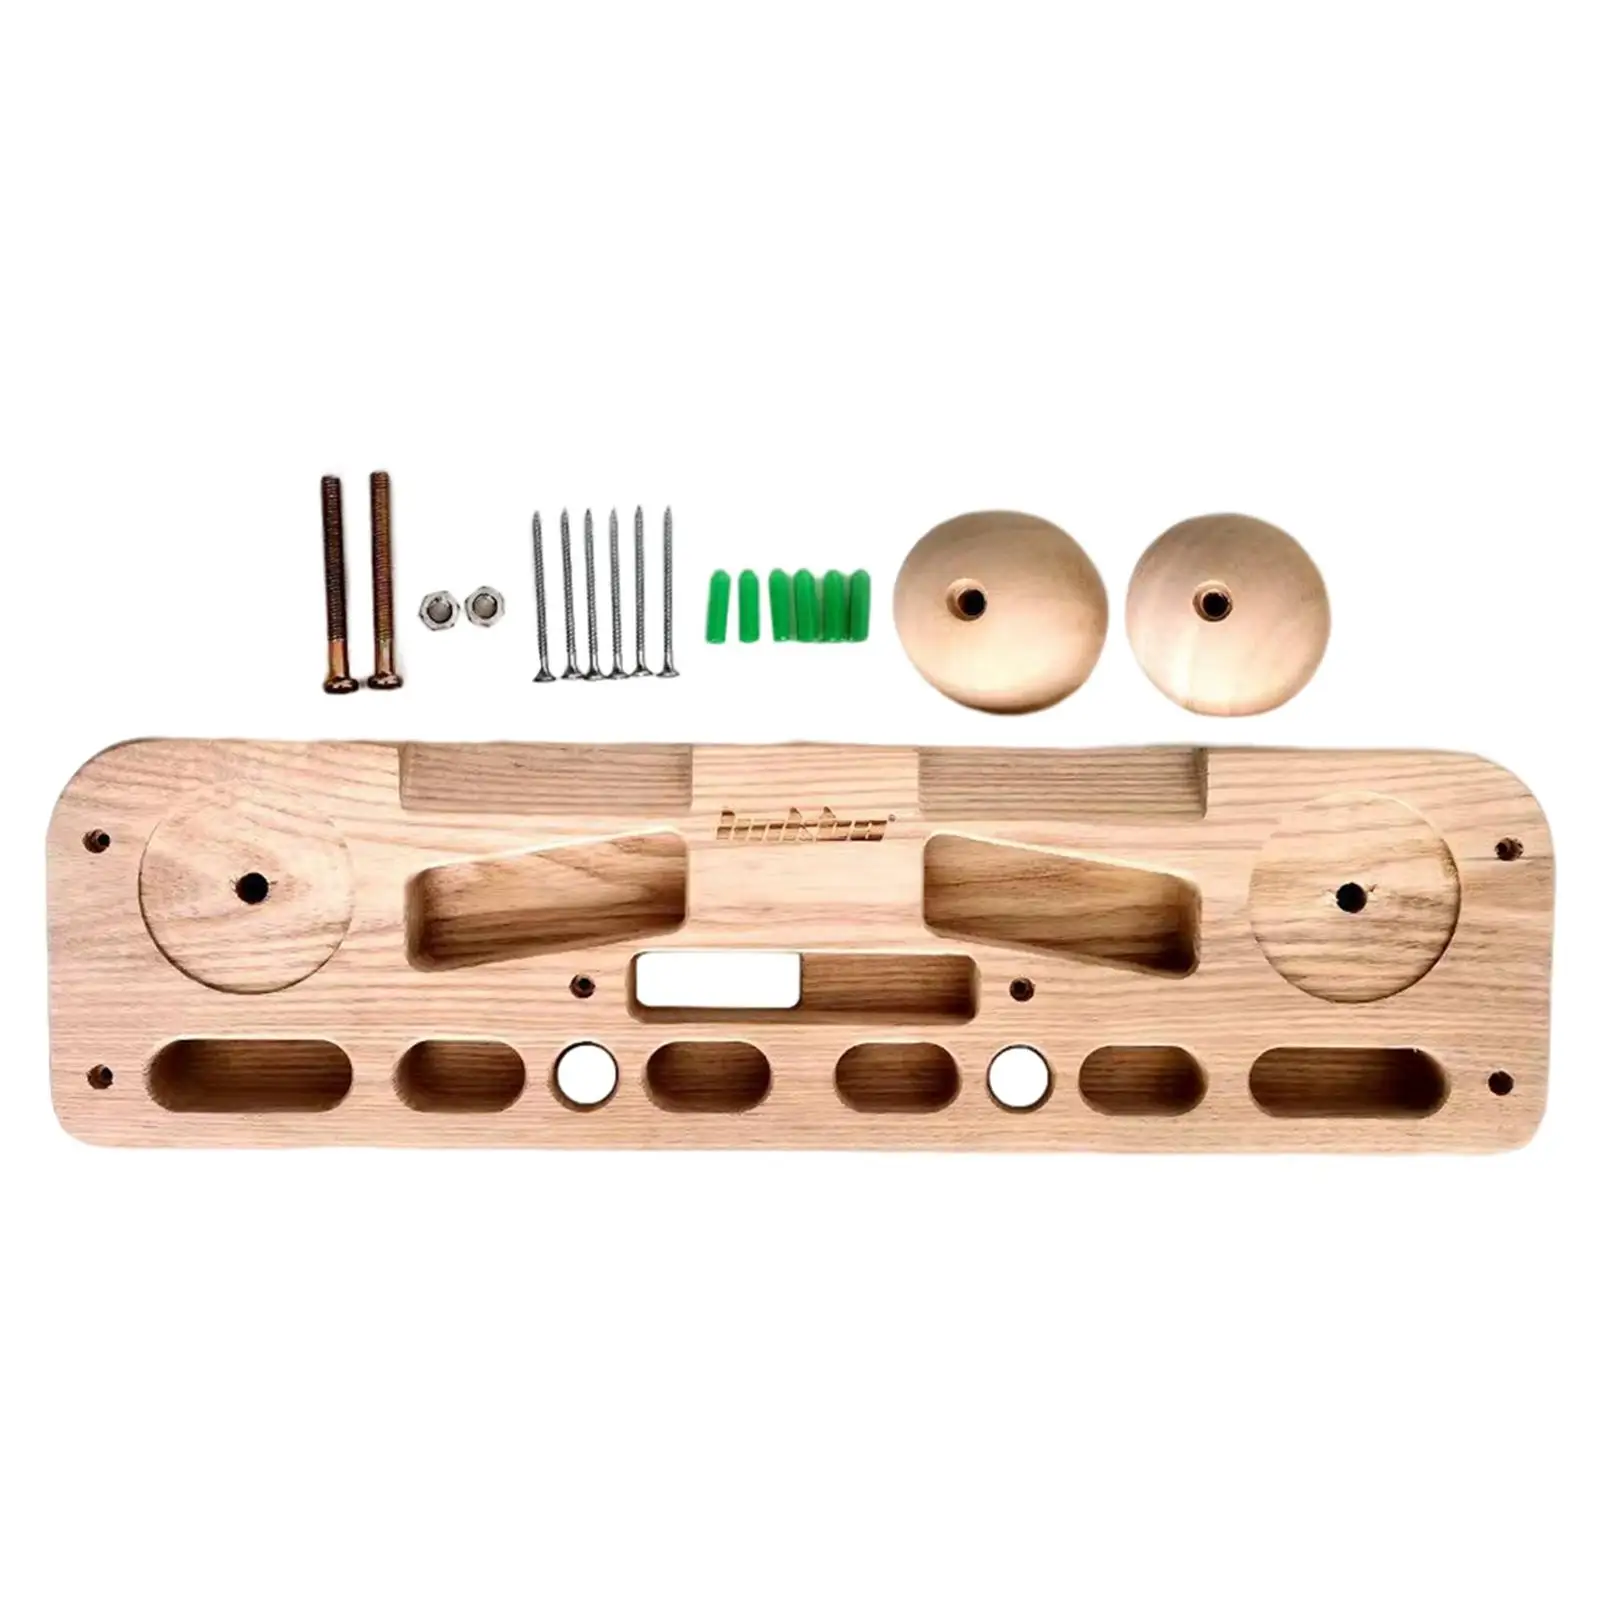 Portable Hangboard Finger Strengthener Training Finger Grip Strengthen Your Grips, Arms and More Wooden Hang Board for Indoor